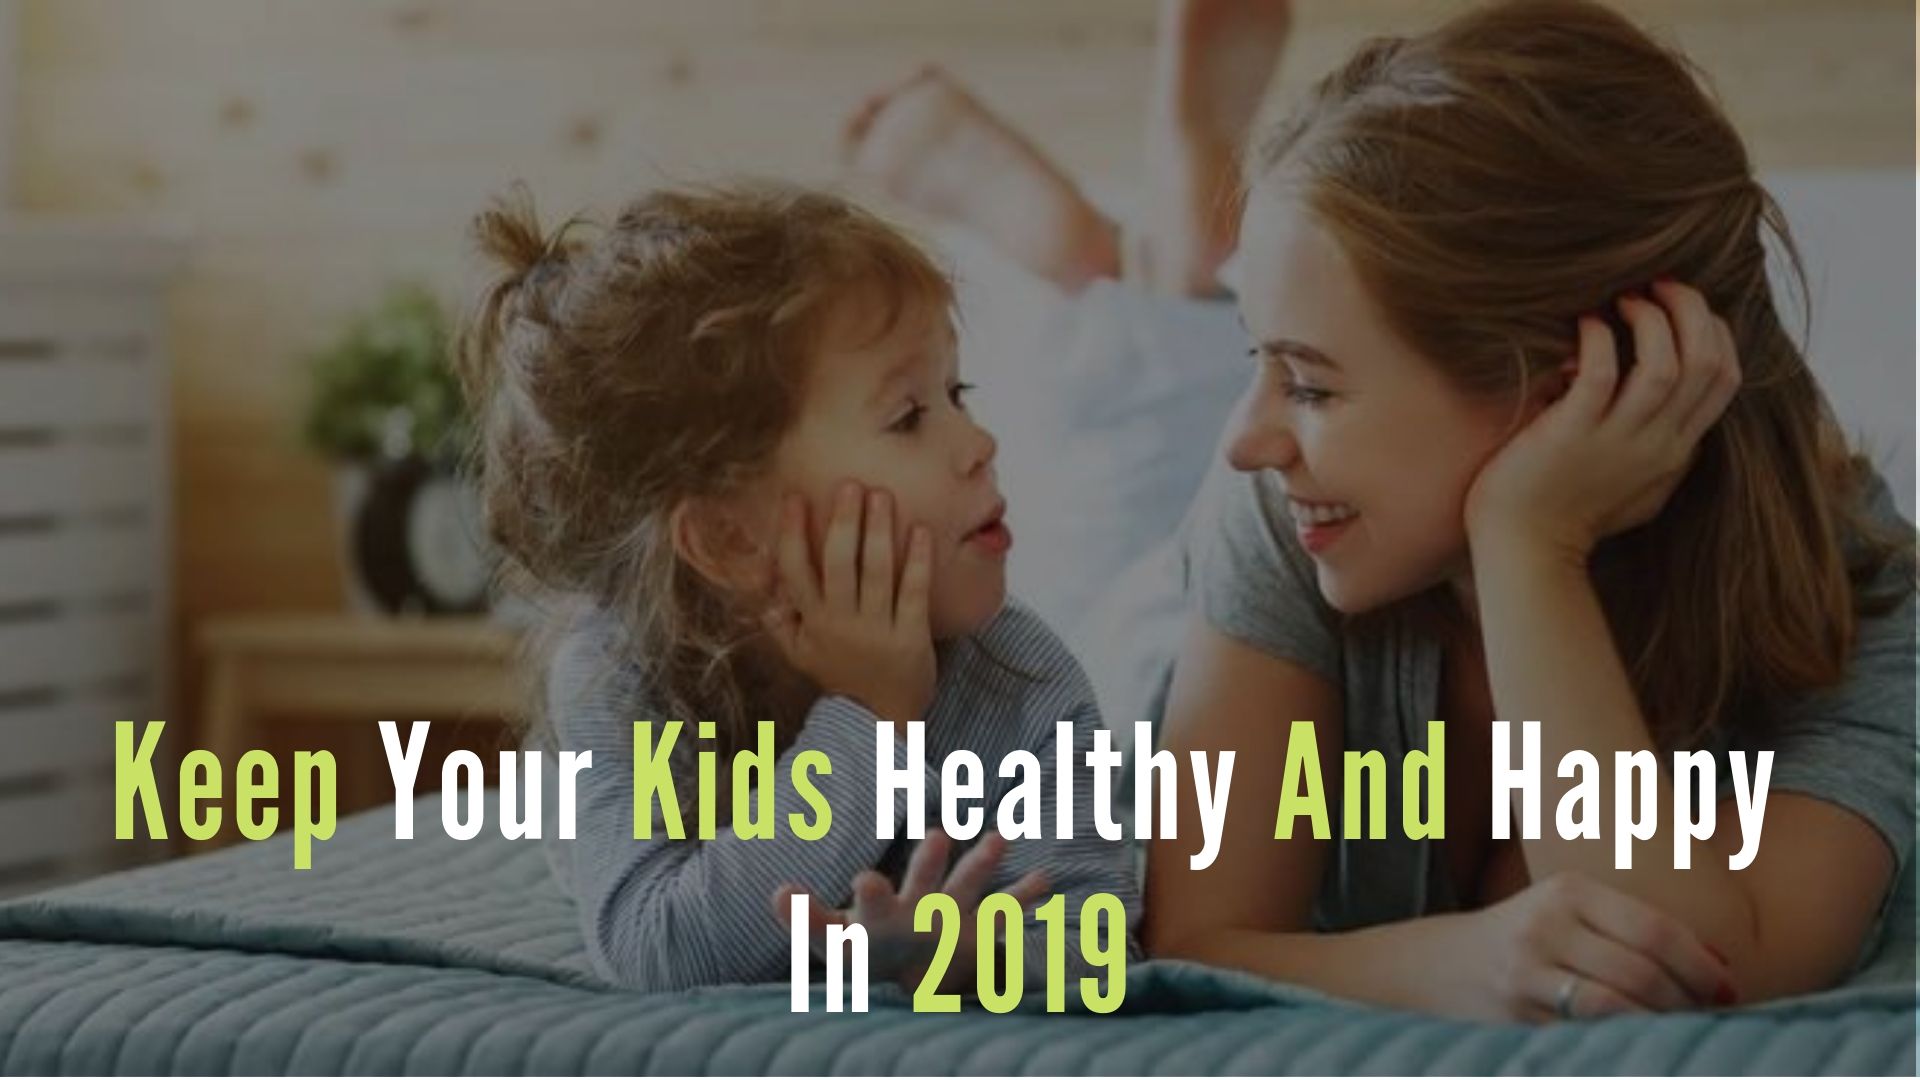 12 Ways to Keep Your Kids Healthy and Happy in 2019